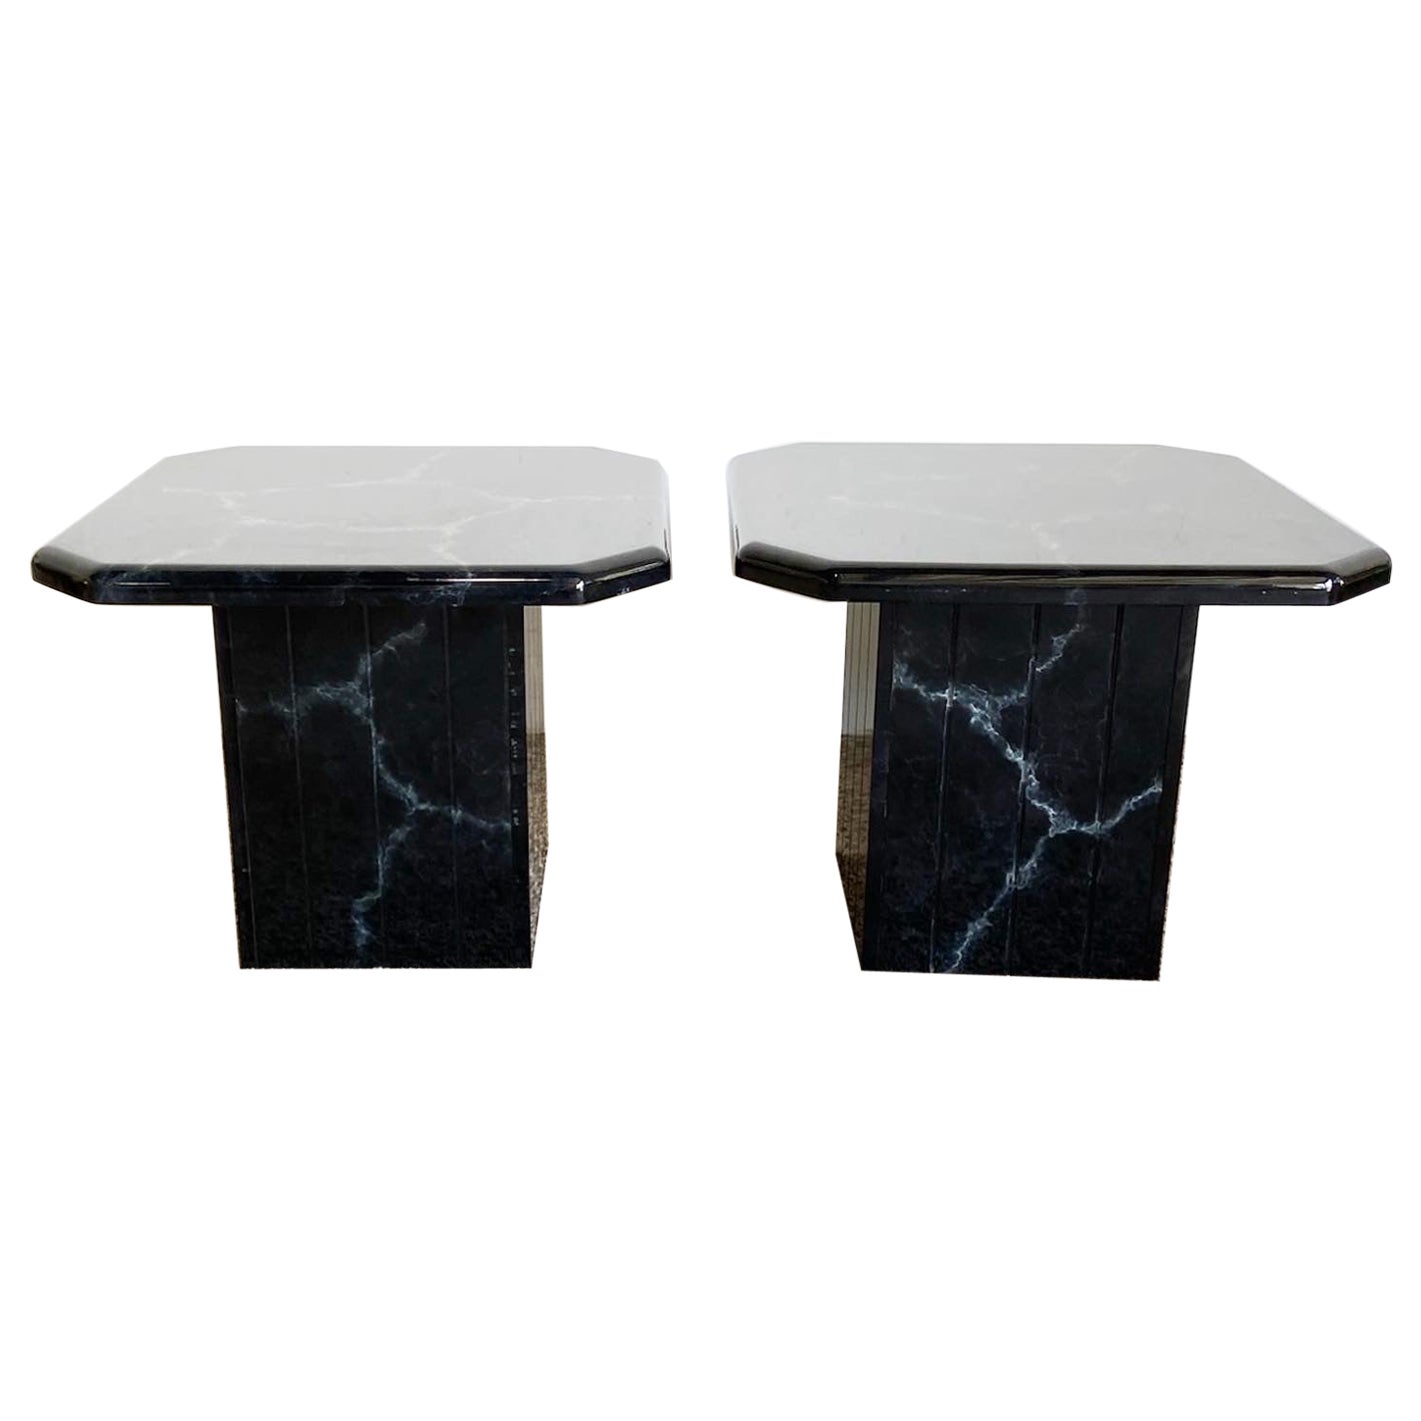 Postmodern Black Faux Marble Side Tables - a Pair For Sale